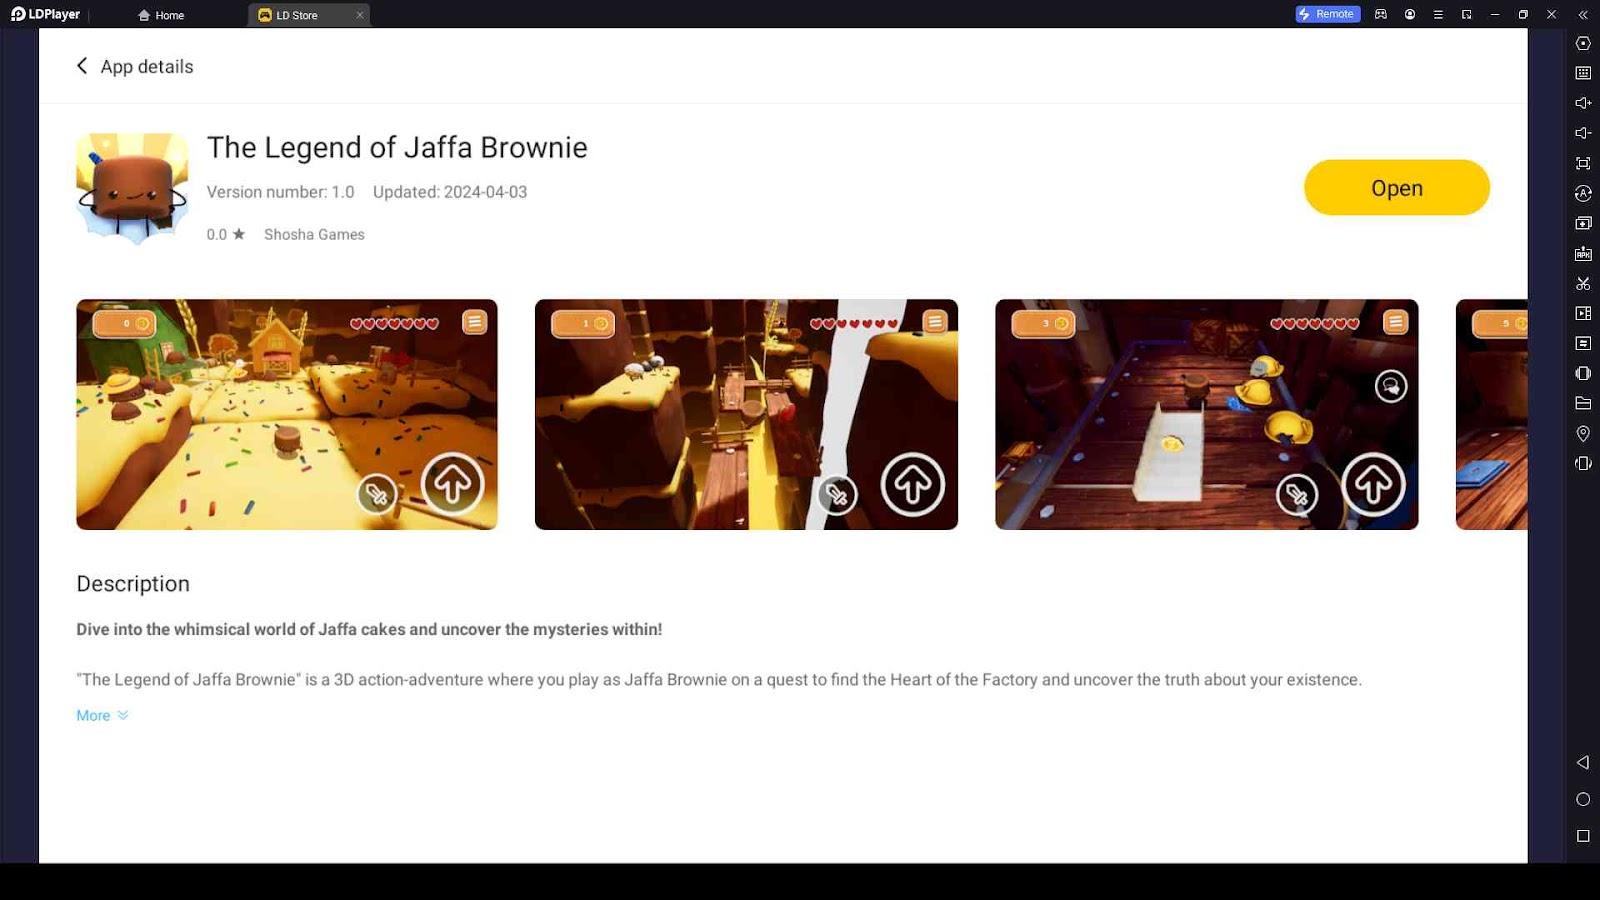 Playing The Legend of Jaffa Brownie on LDPlayer